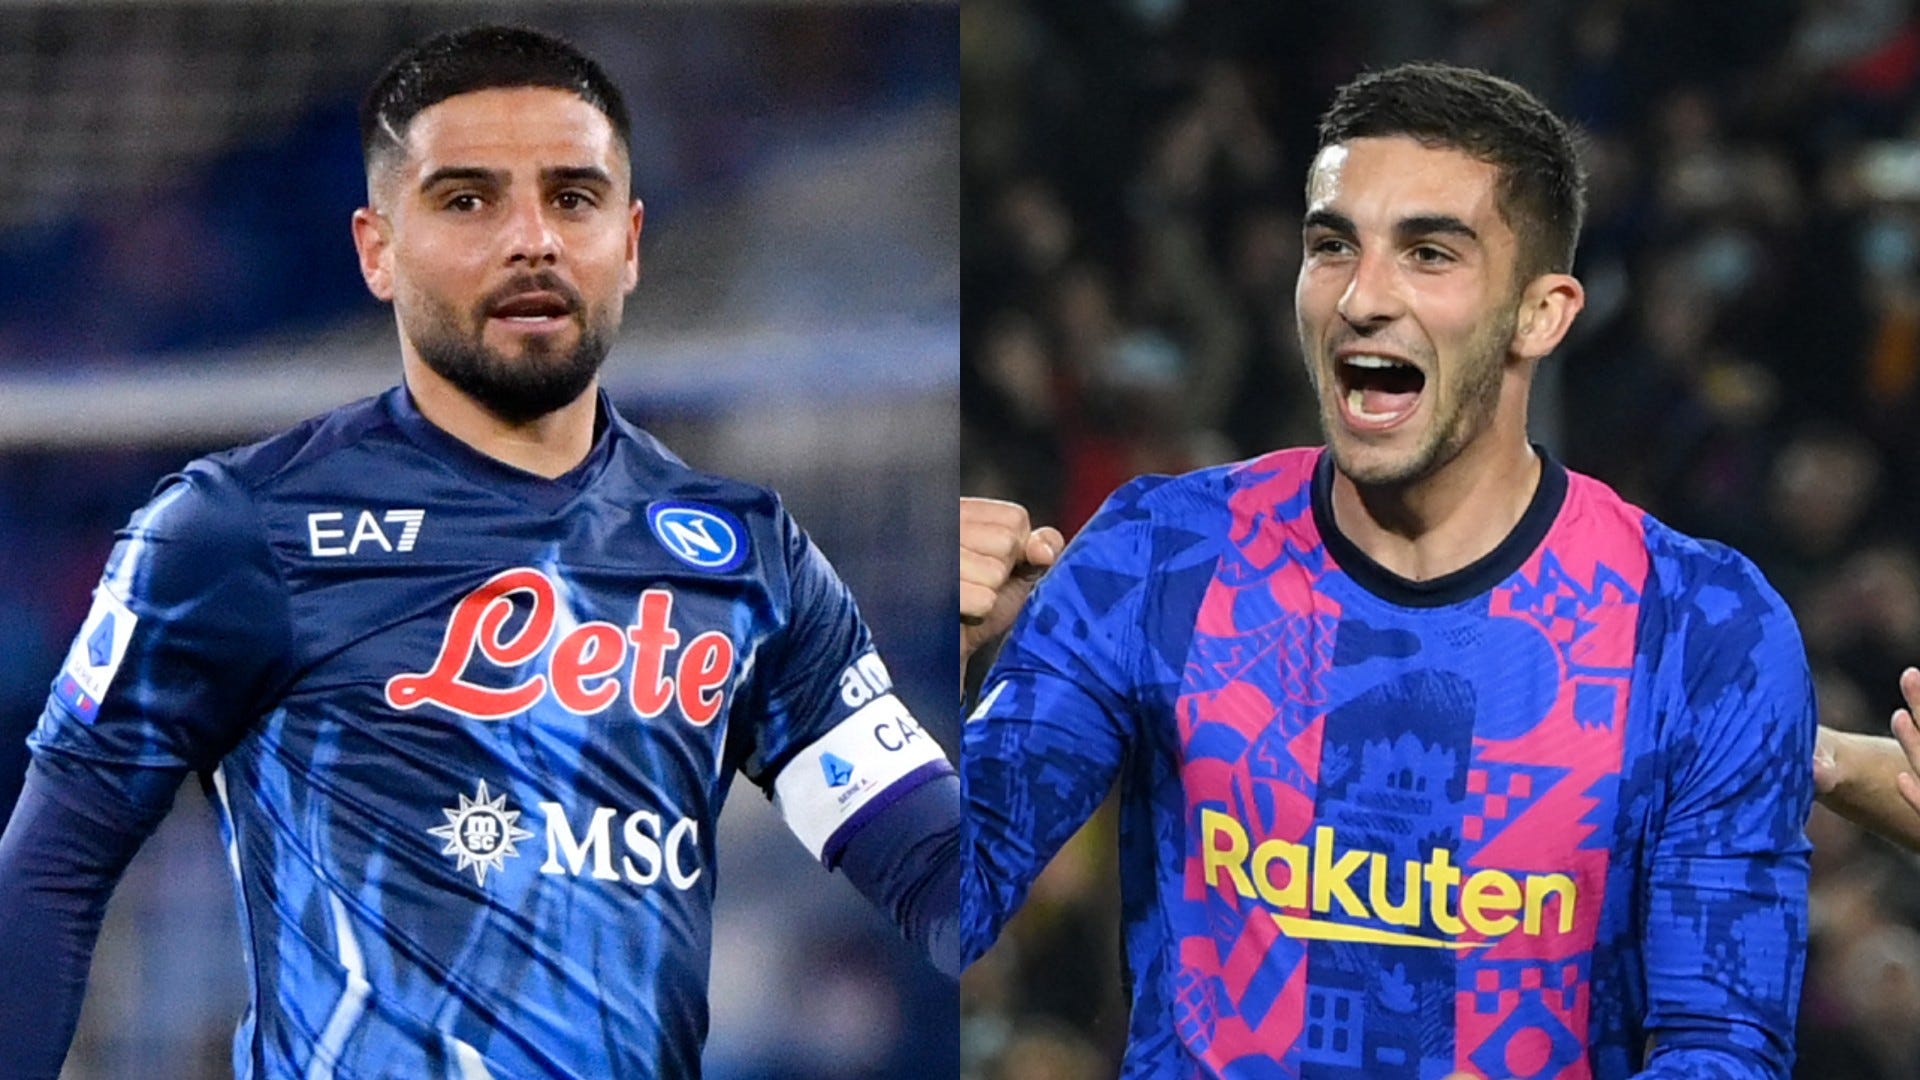 How to watch Napoli vs Barcelona in the 2021-22 Europa League from India? Goal India